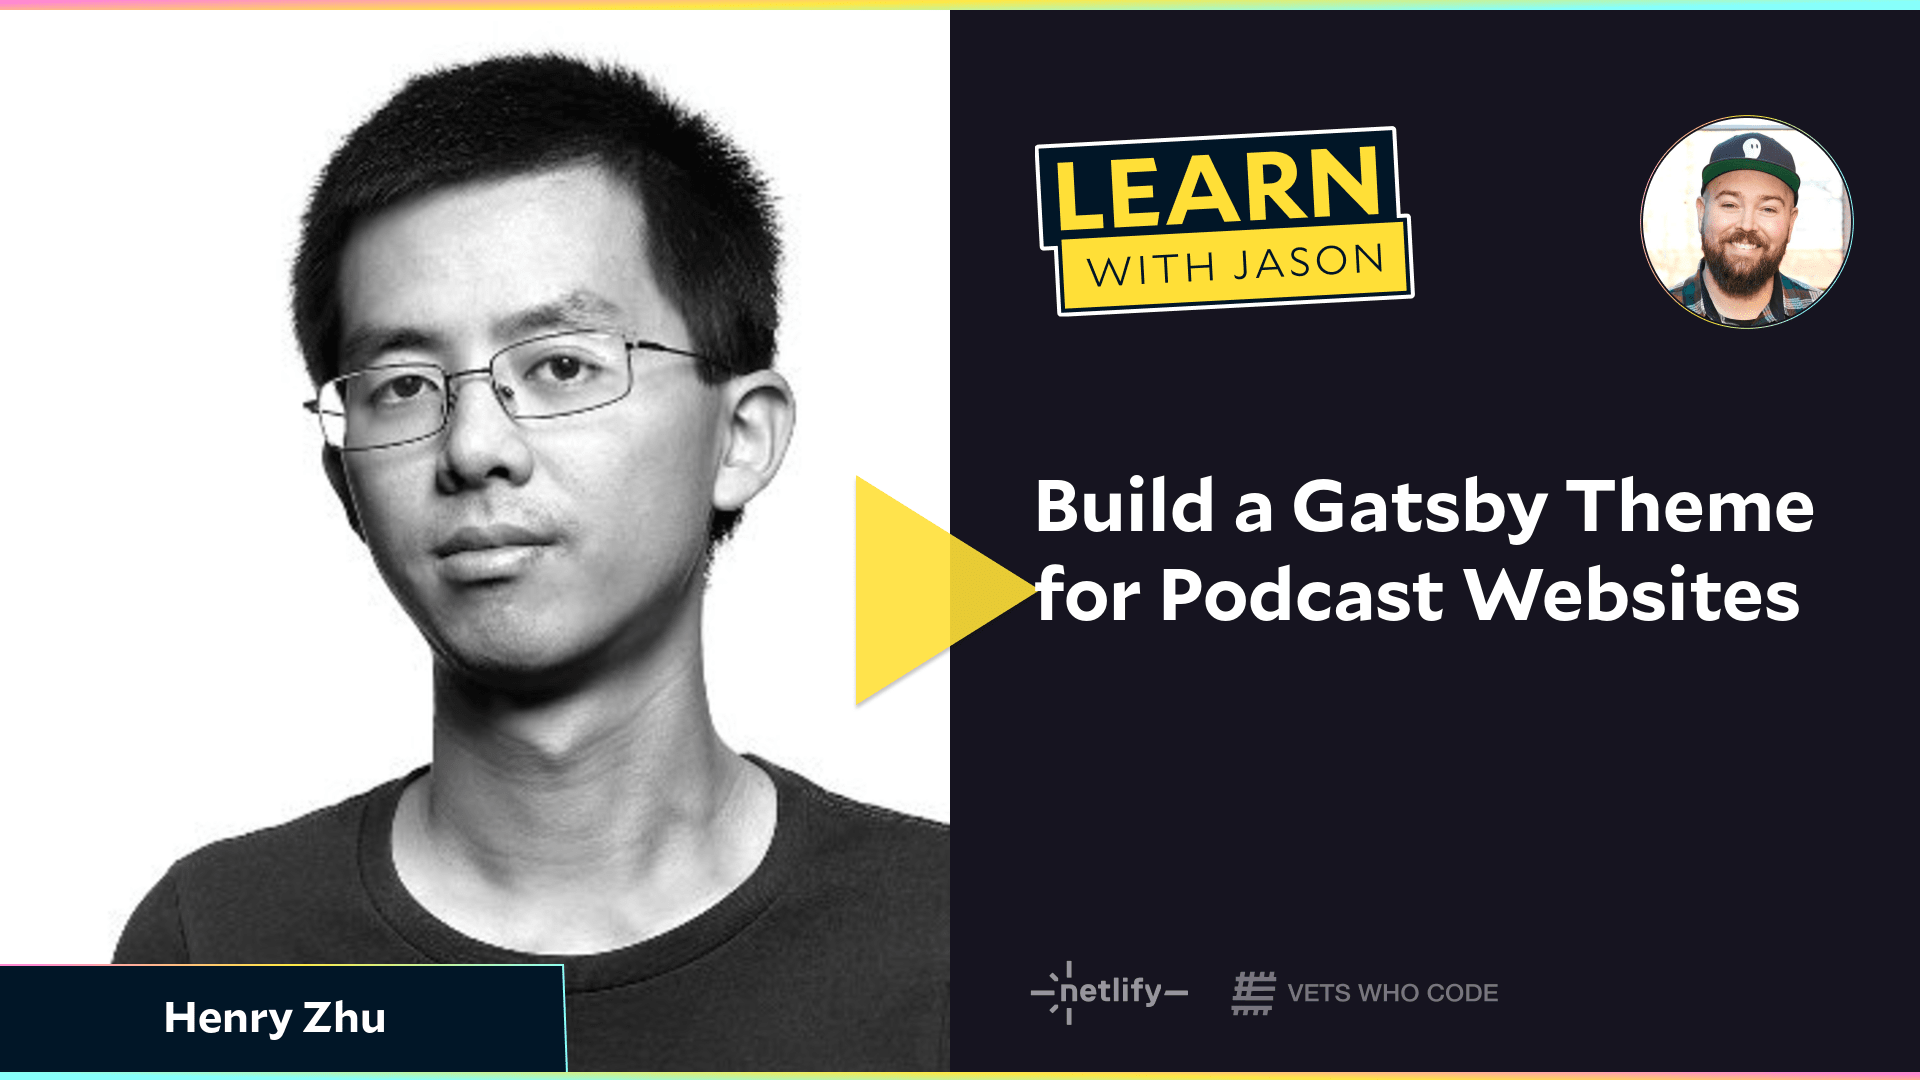 Build a Gatsby Theme for Podcast Websites (with Henry Zhu)